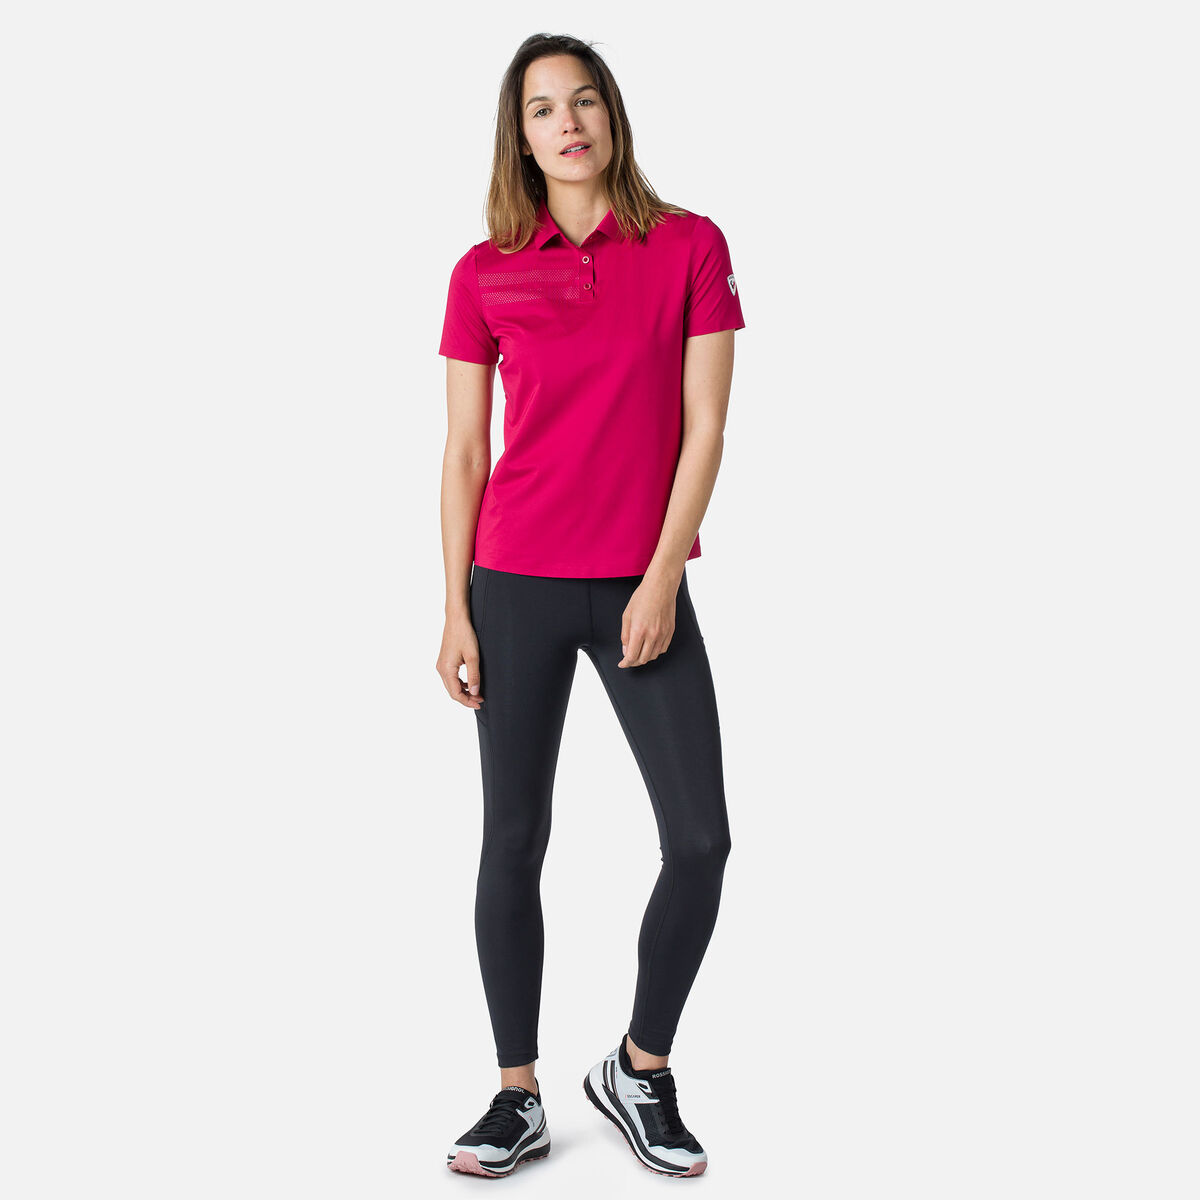 Women's lightweight breathable polo shirt, OUTLET